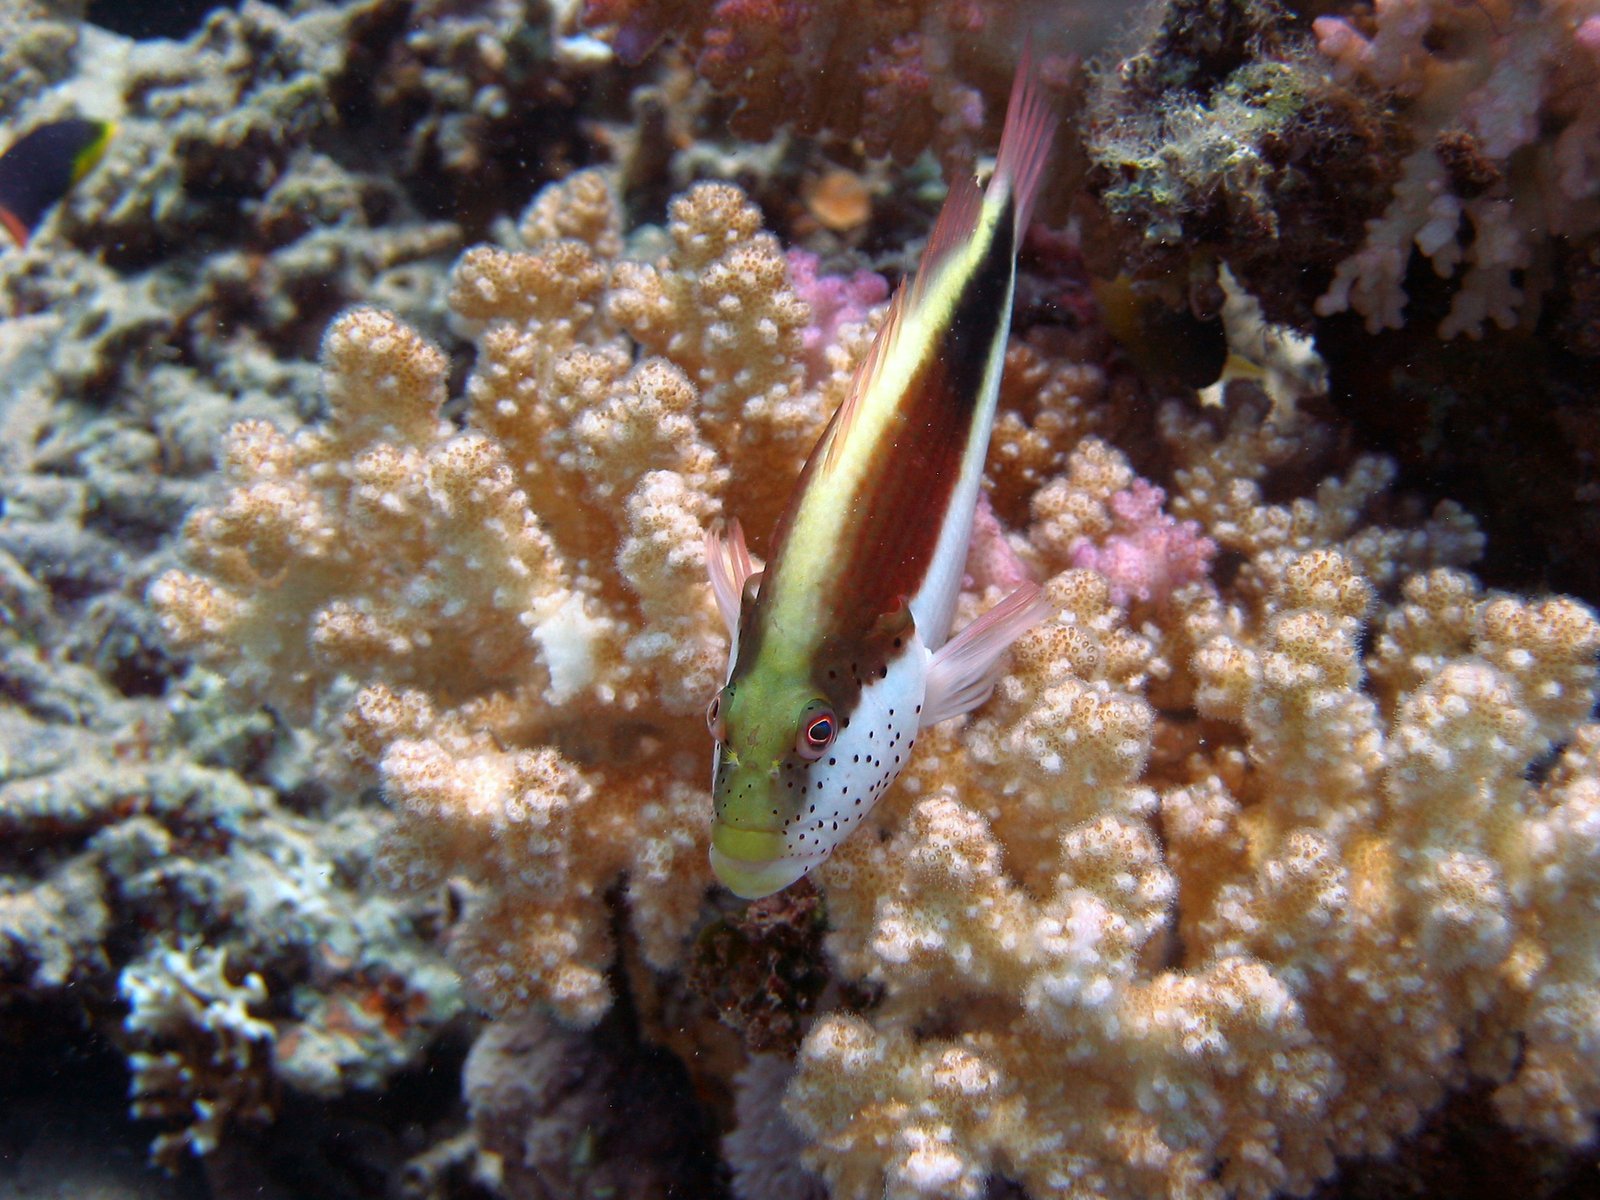 a green and yellow sea anemone hiding in coral reefs